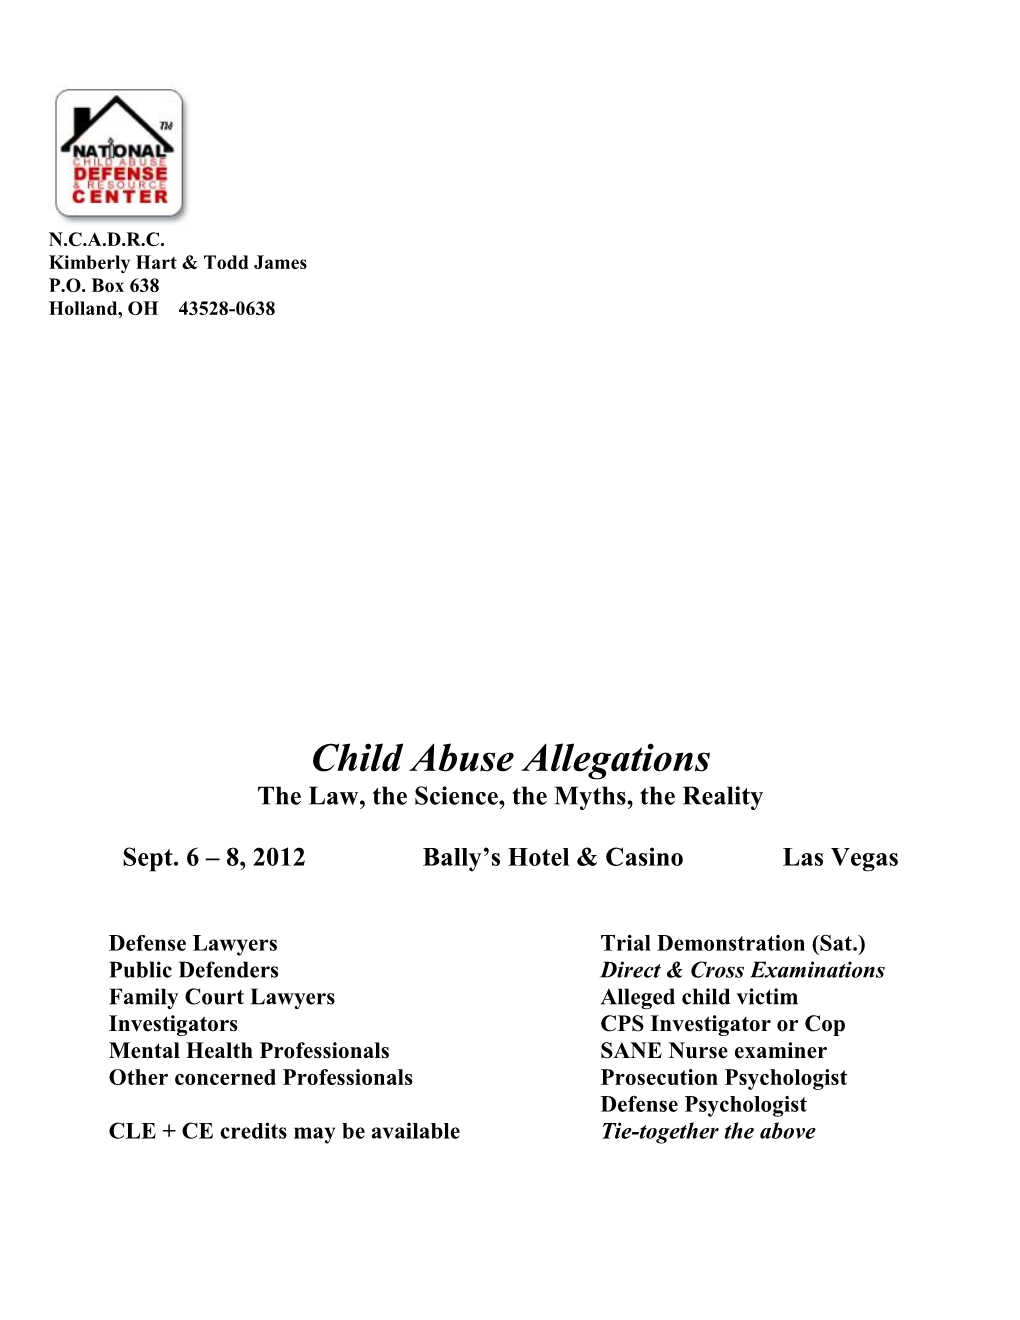 Child Abuse Allegations the Law, the Science, the Myths, the Reality